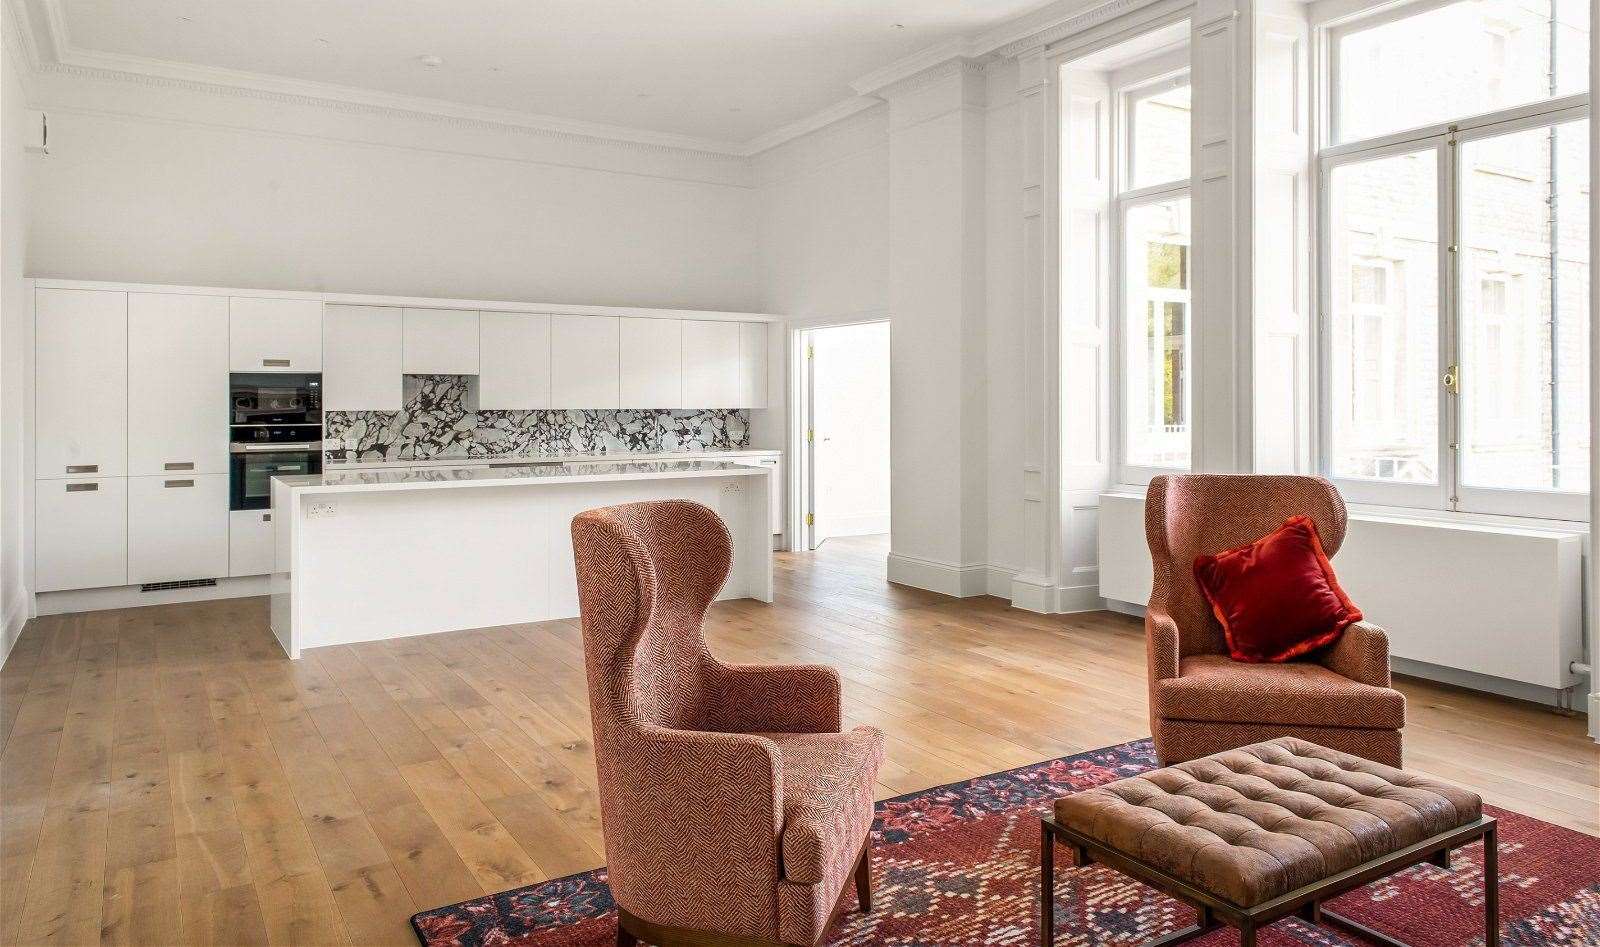 The pricey apartment has a spacious kitchen and living room area with marble fireplace. Picture: Maison